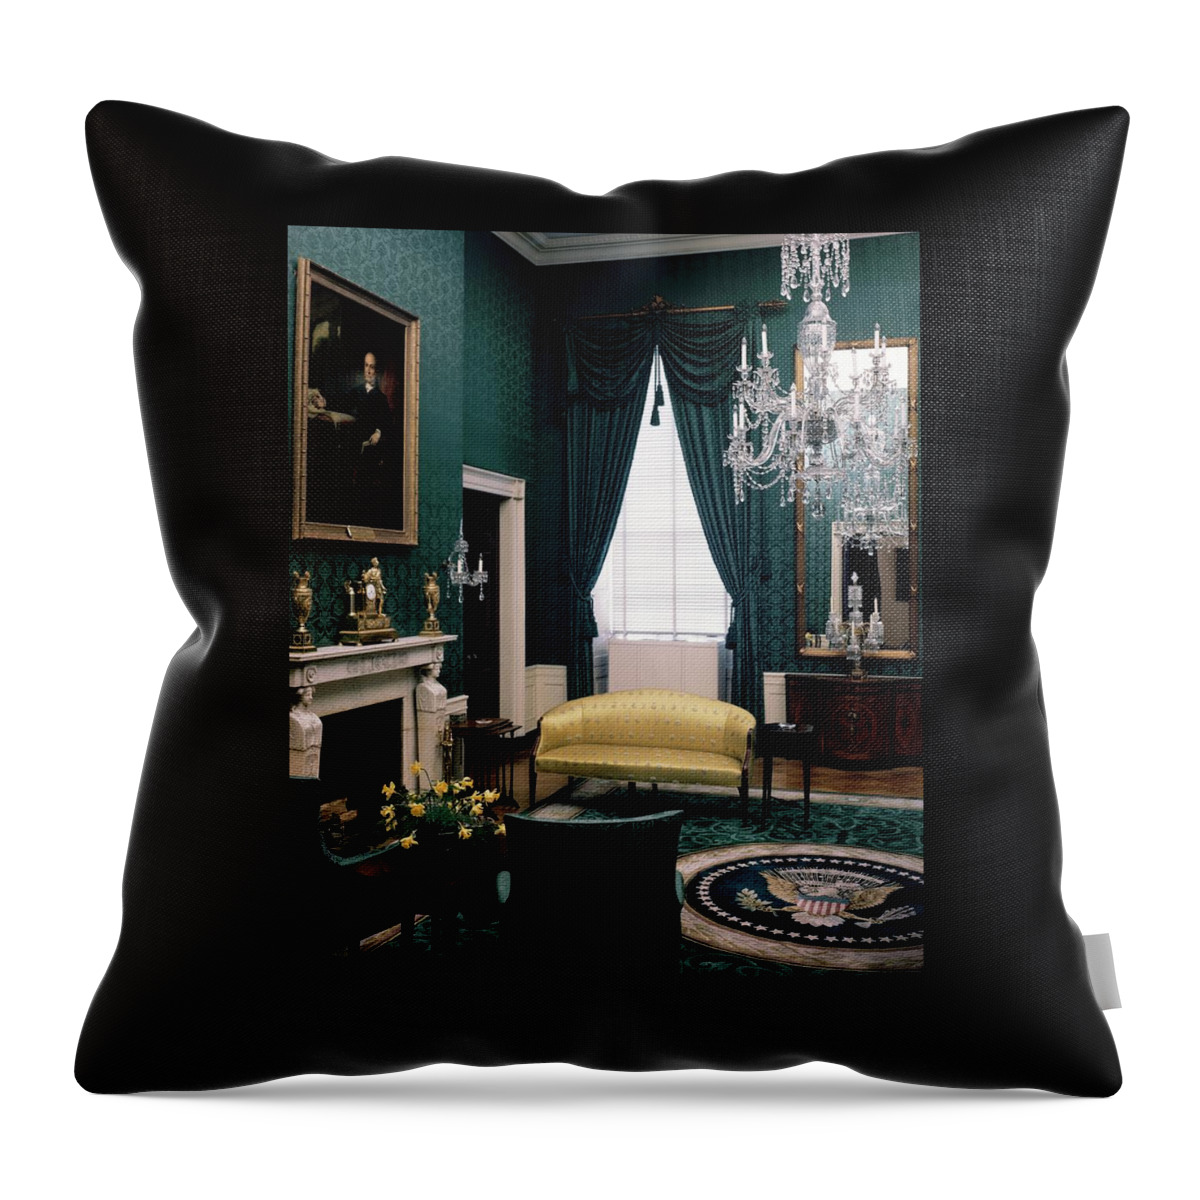 The Green Room In The White House Throw Pillow